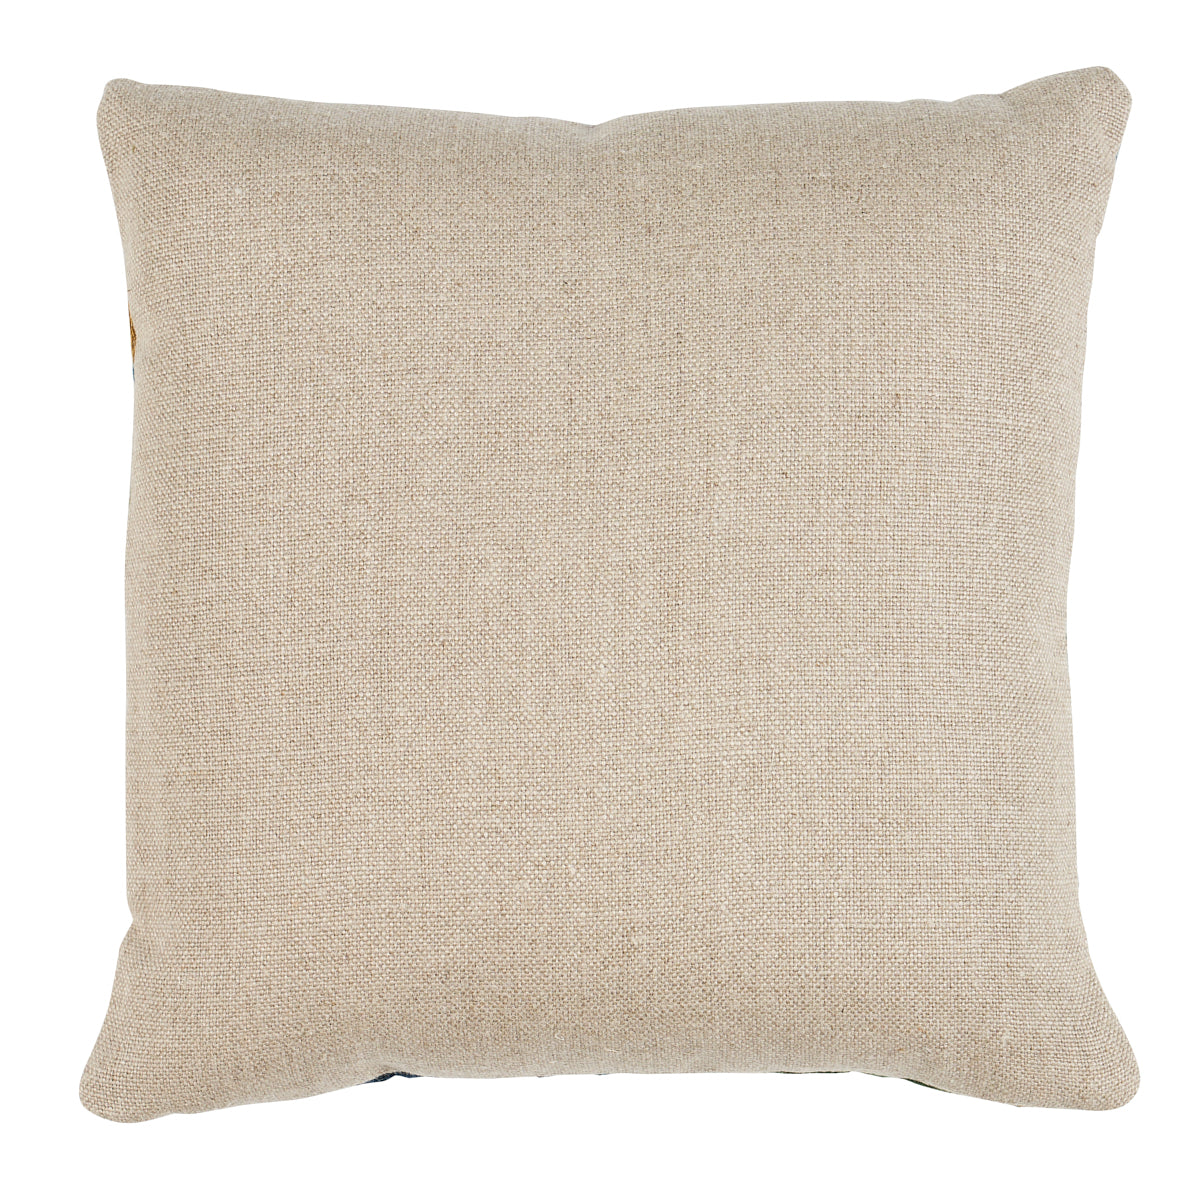 Gerry Embroidery Pillow B | Document